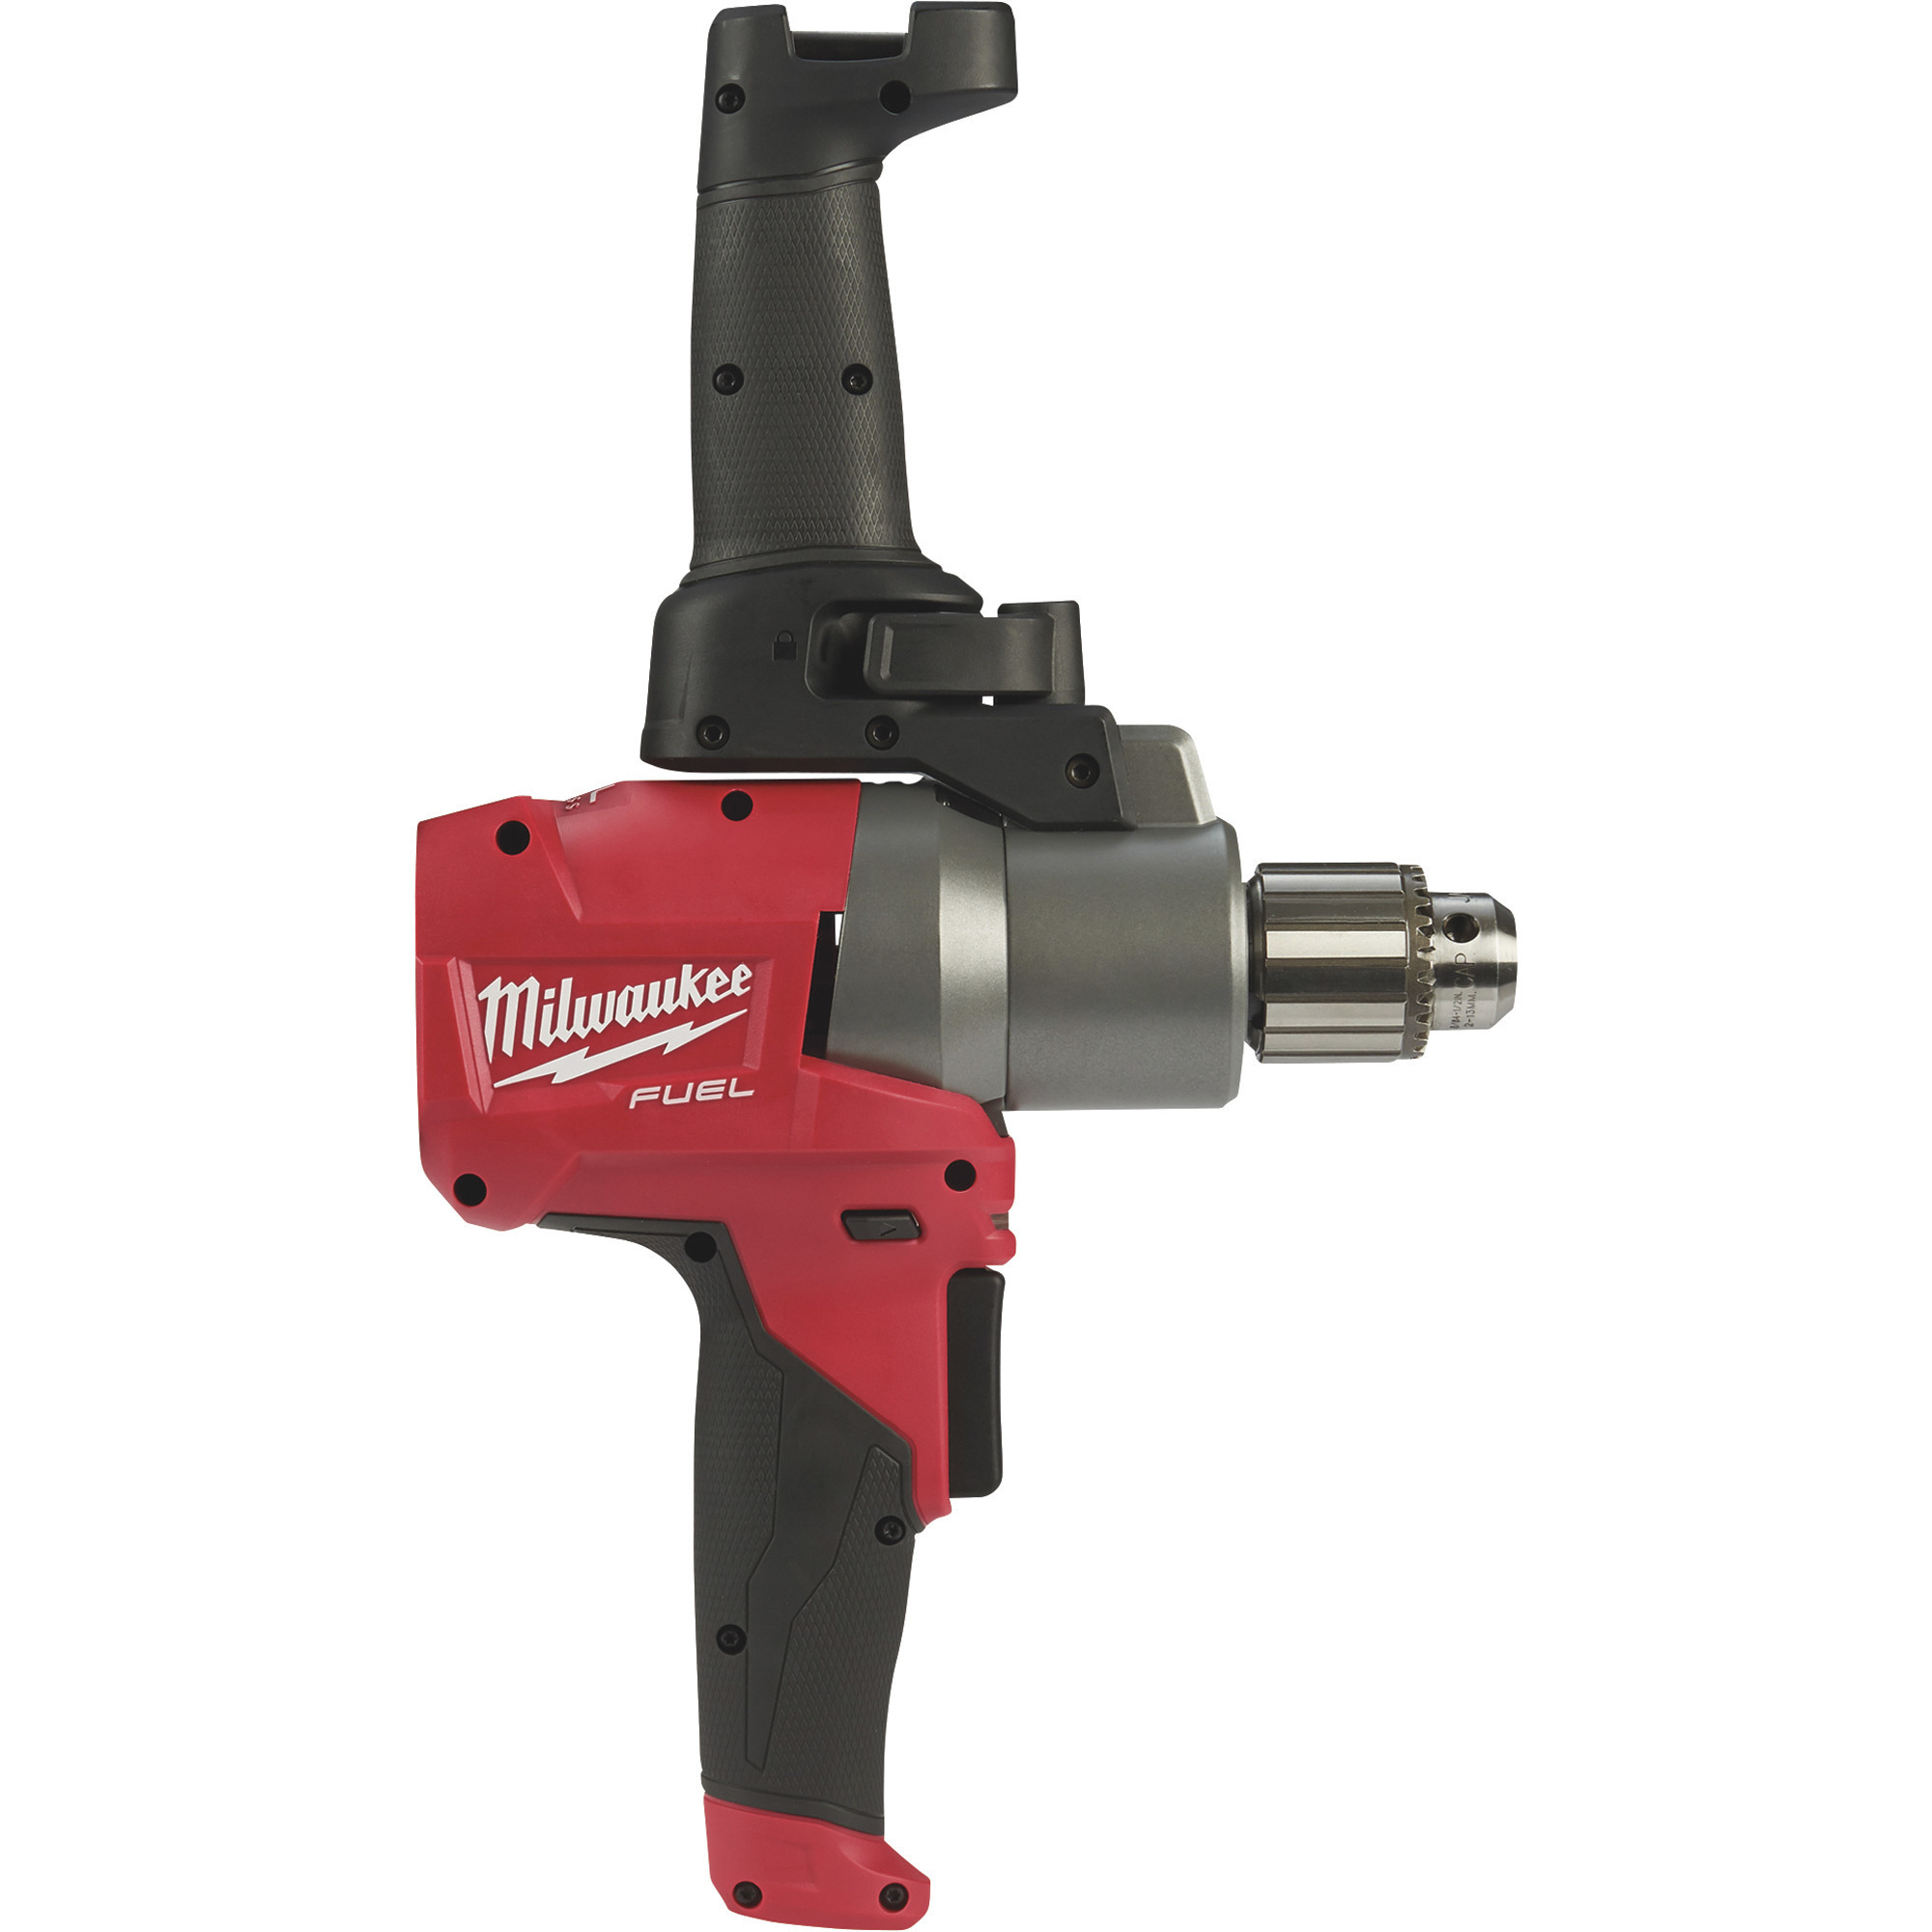 Milwaukee M18 Fuel Mud Mixer, Tool Only, Model 2810-20